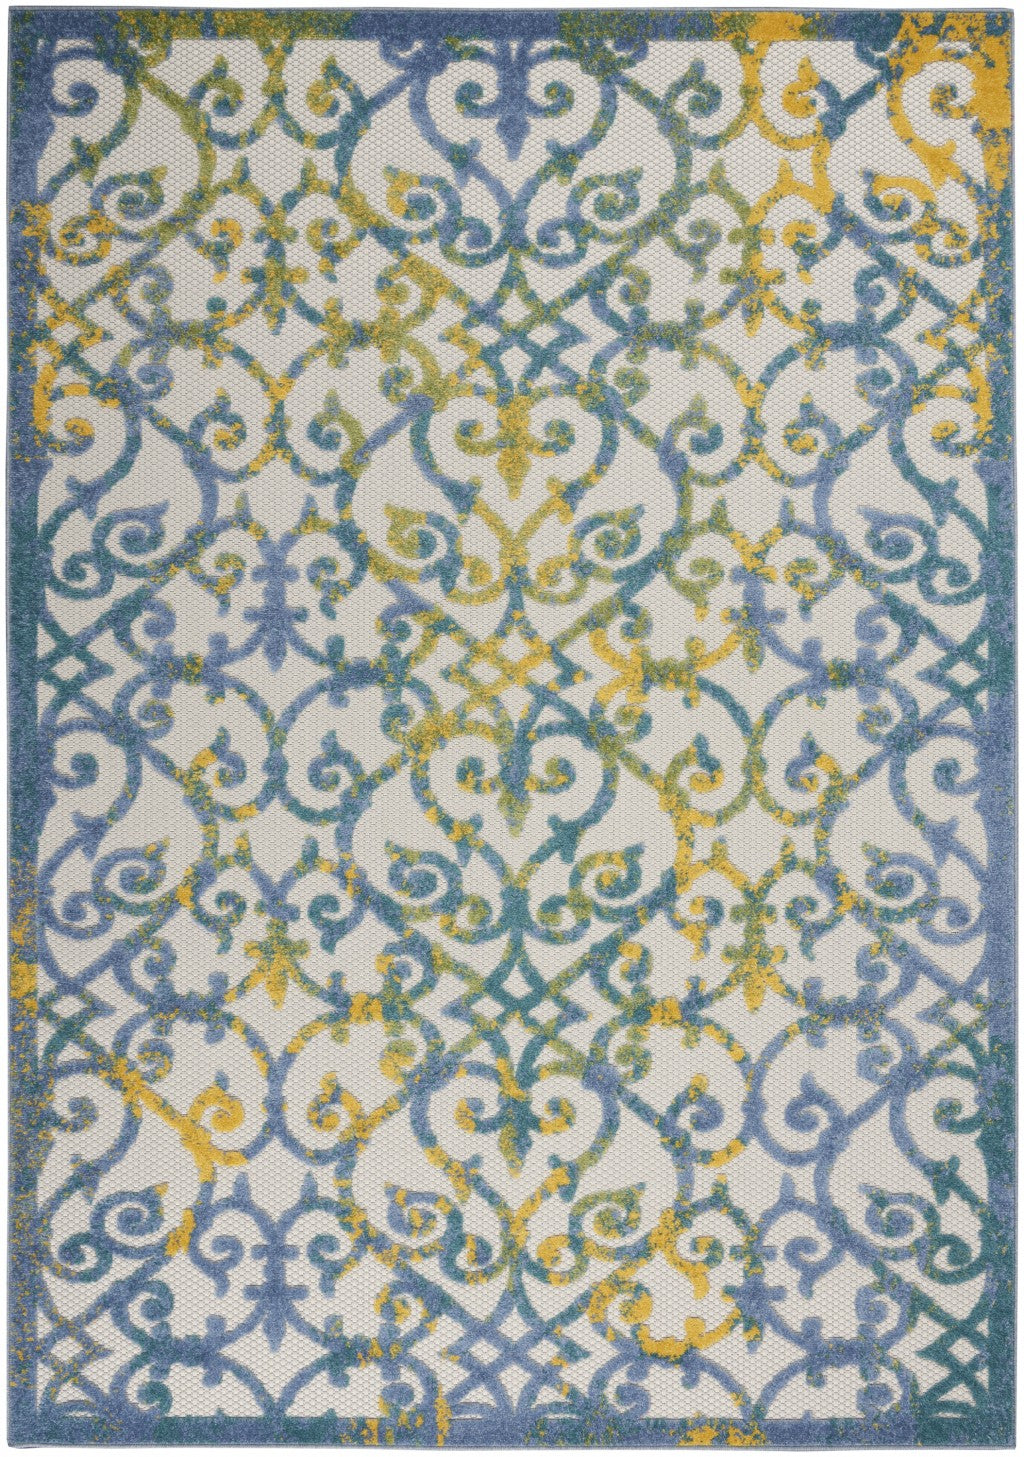 5’ x 7’ Ivory and Blue Indoor Outdoor Area Rug